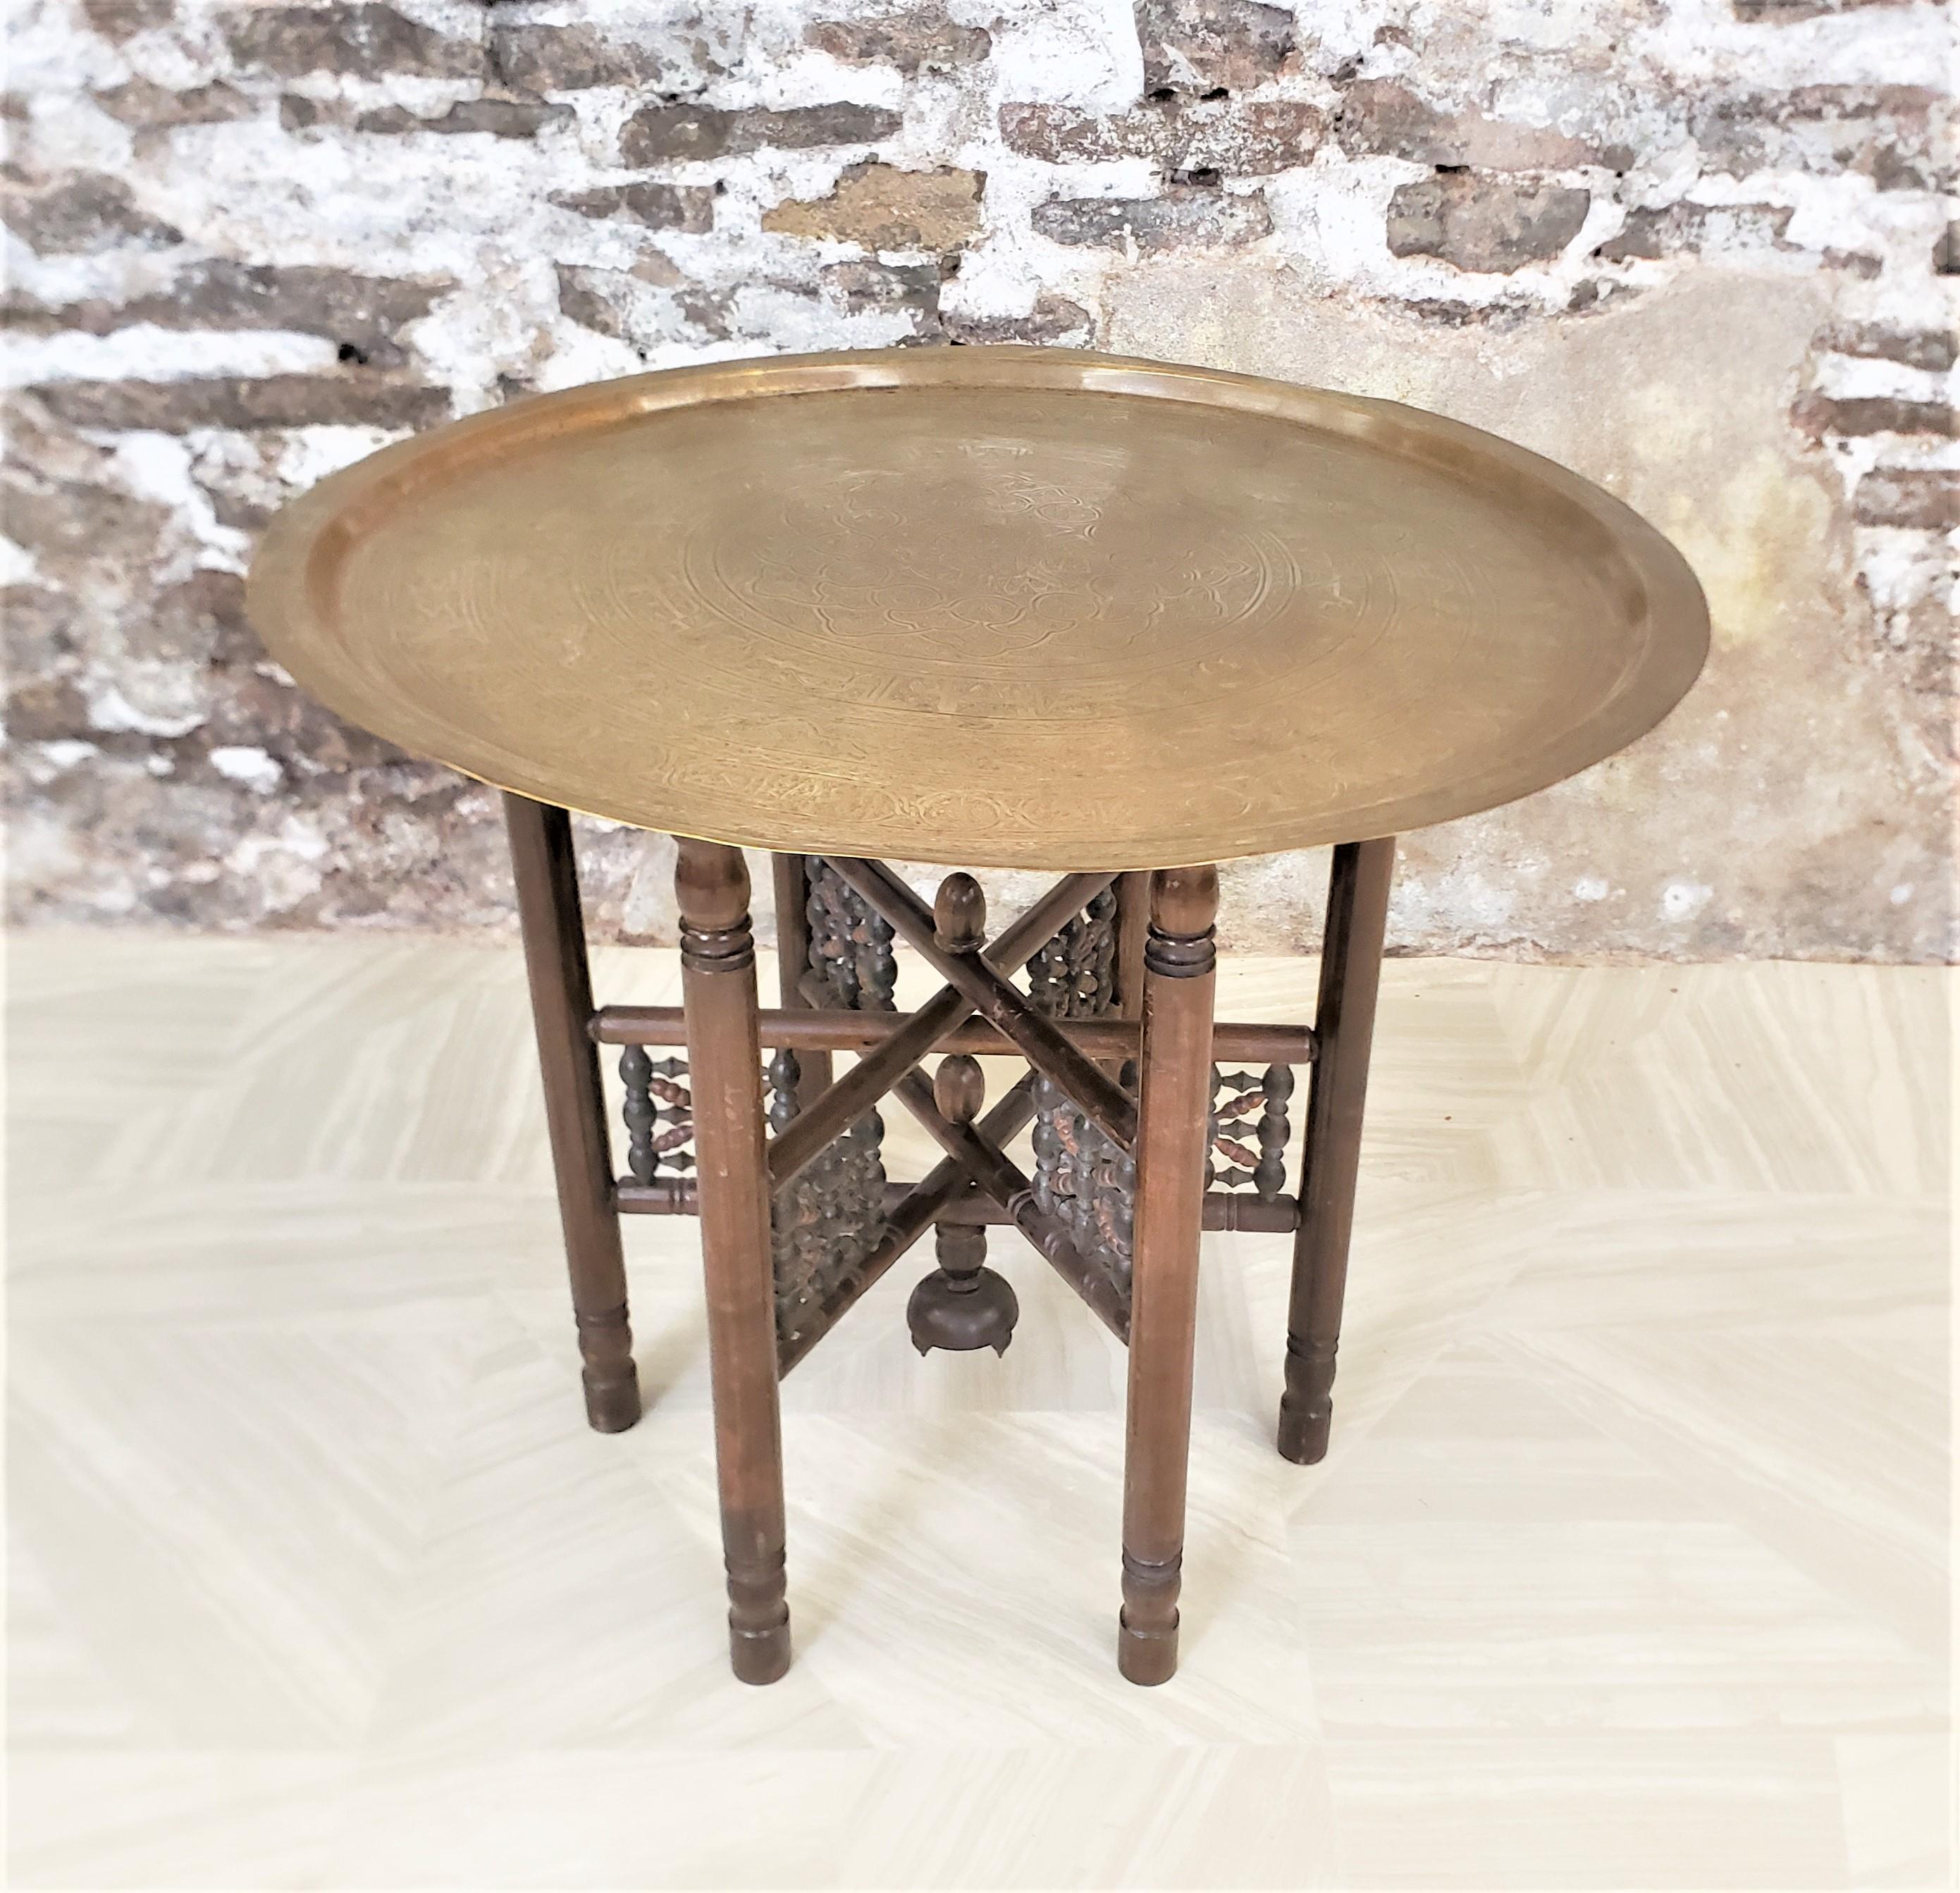 This large brass tray table has no maker's marks, but is presumed to have originated from India and dating to approximately 1920 and done in an Anglo-Indian style. The large tray has a raised rim and an engraved tray surface with detailed engraving